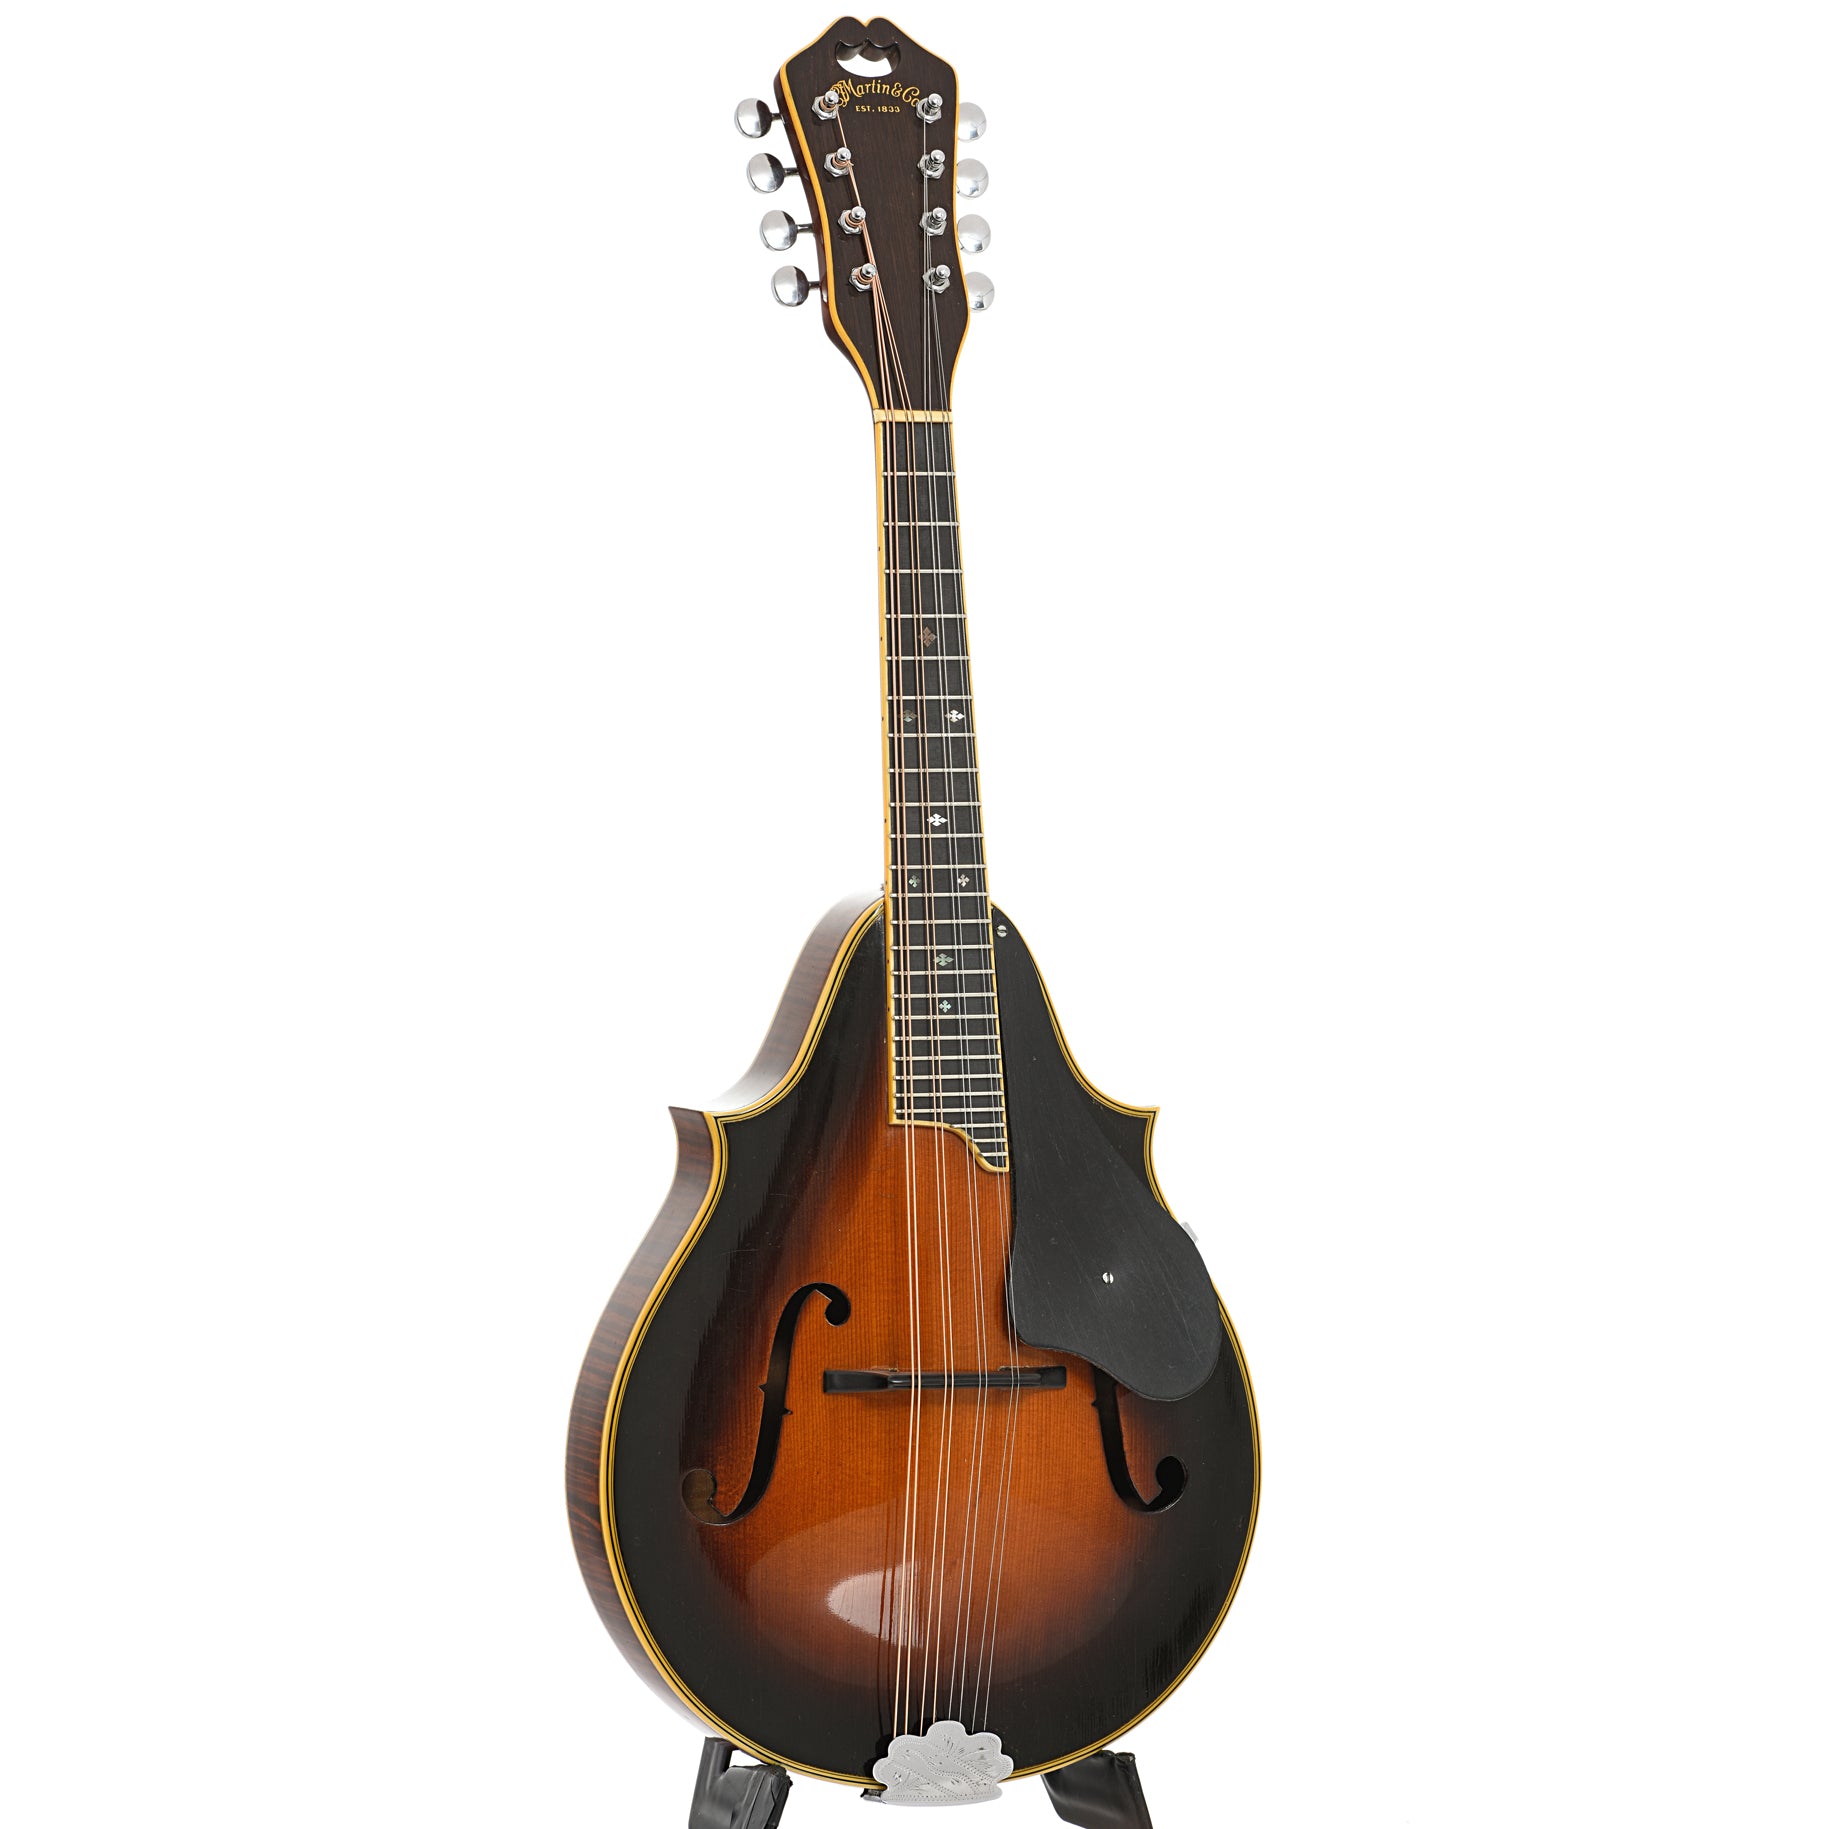 Full front and side of Martin Model 2-30 Mandolin (1936)